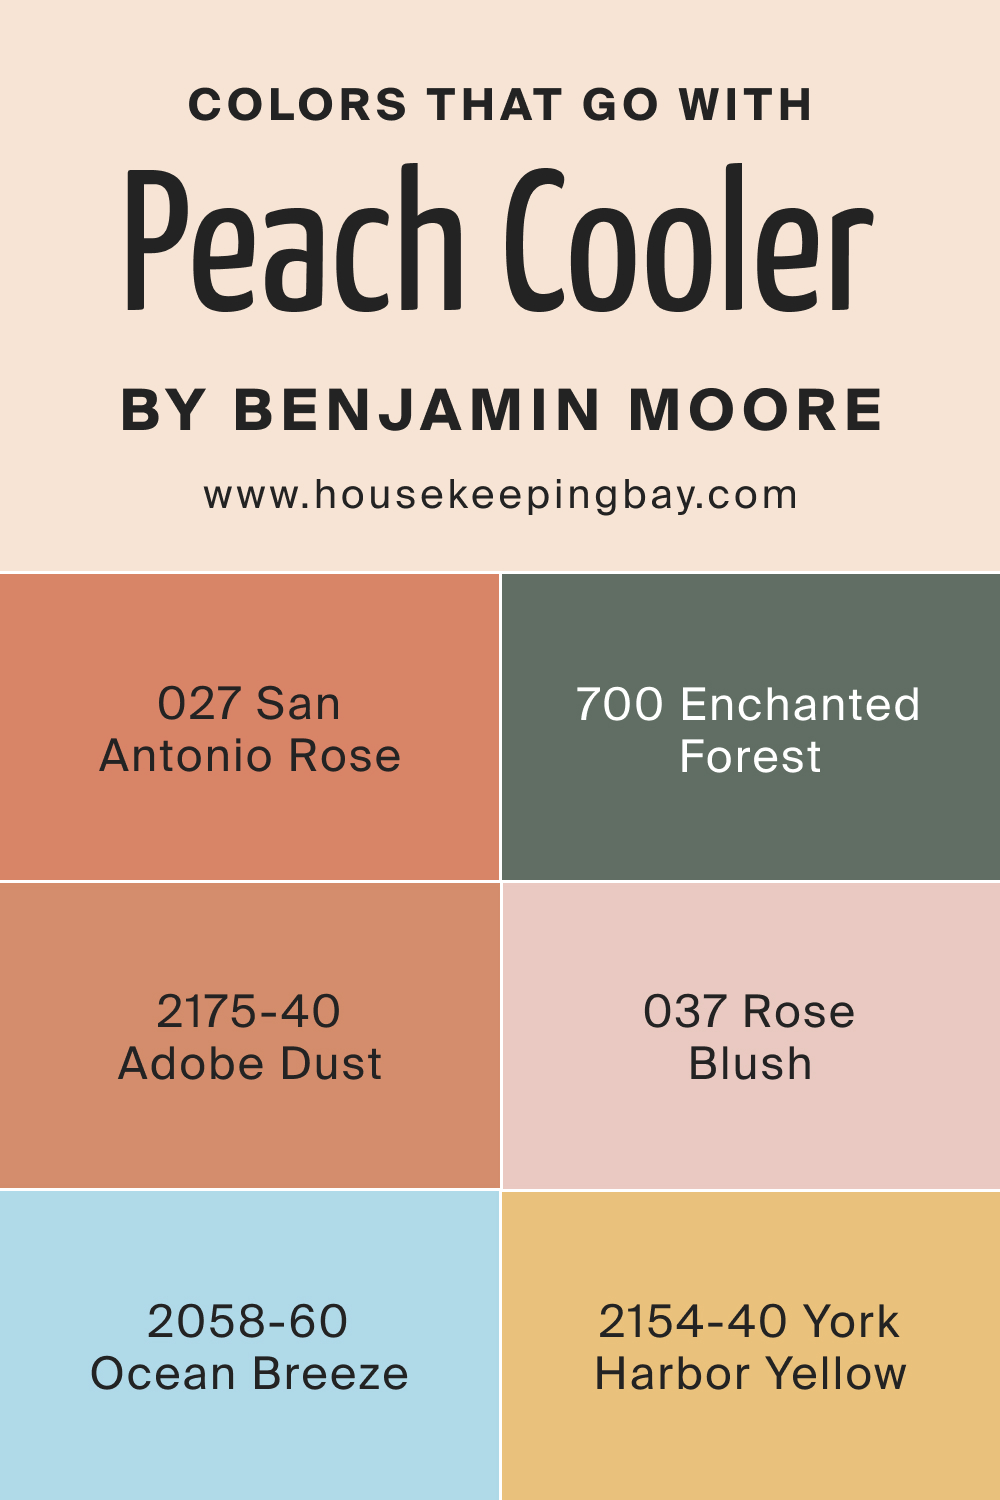 Colors that goes with Peach Cooler 022 by Benjamin Moore